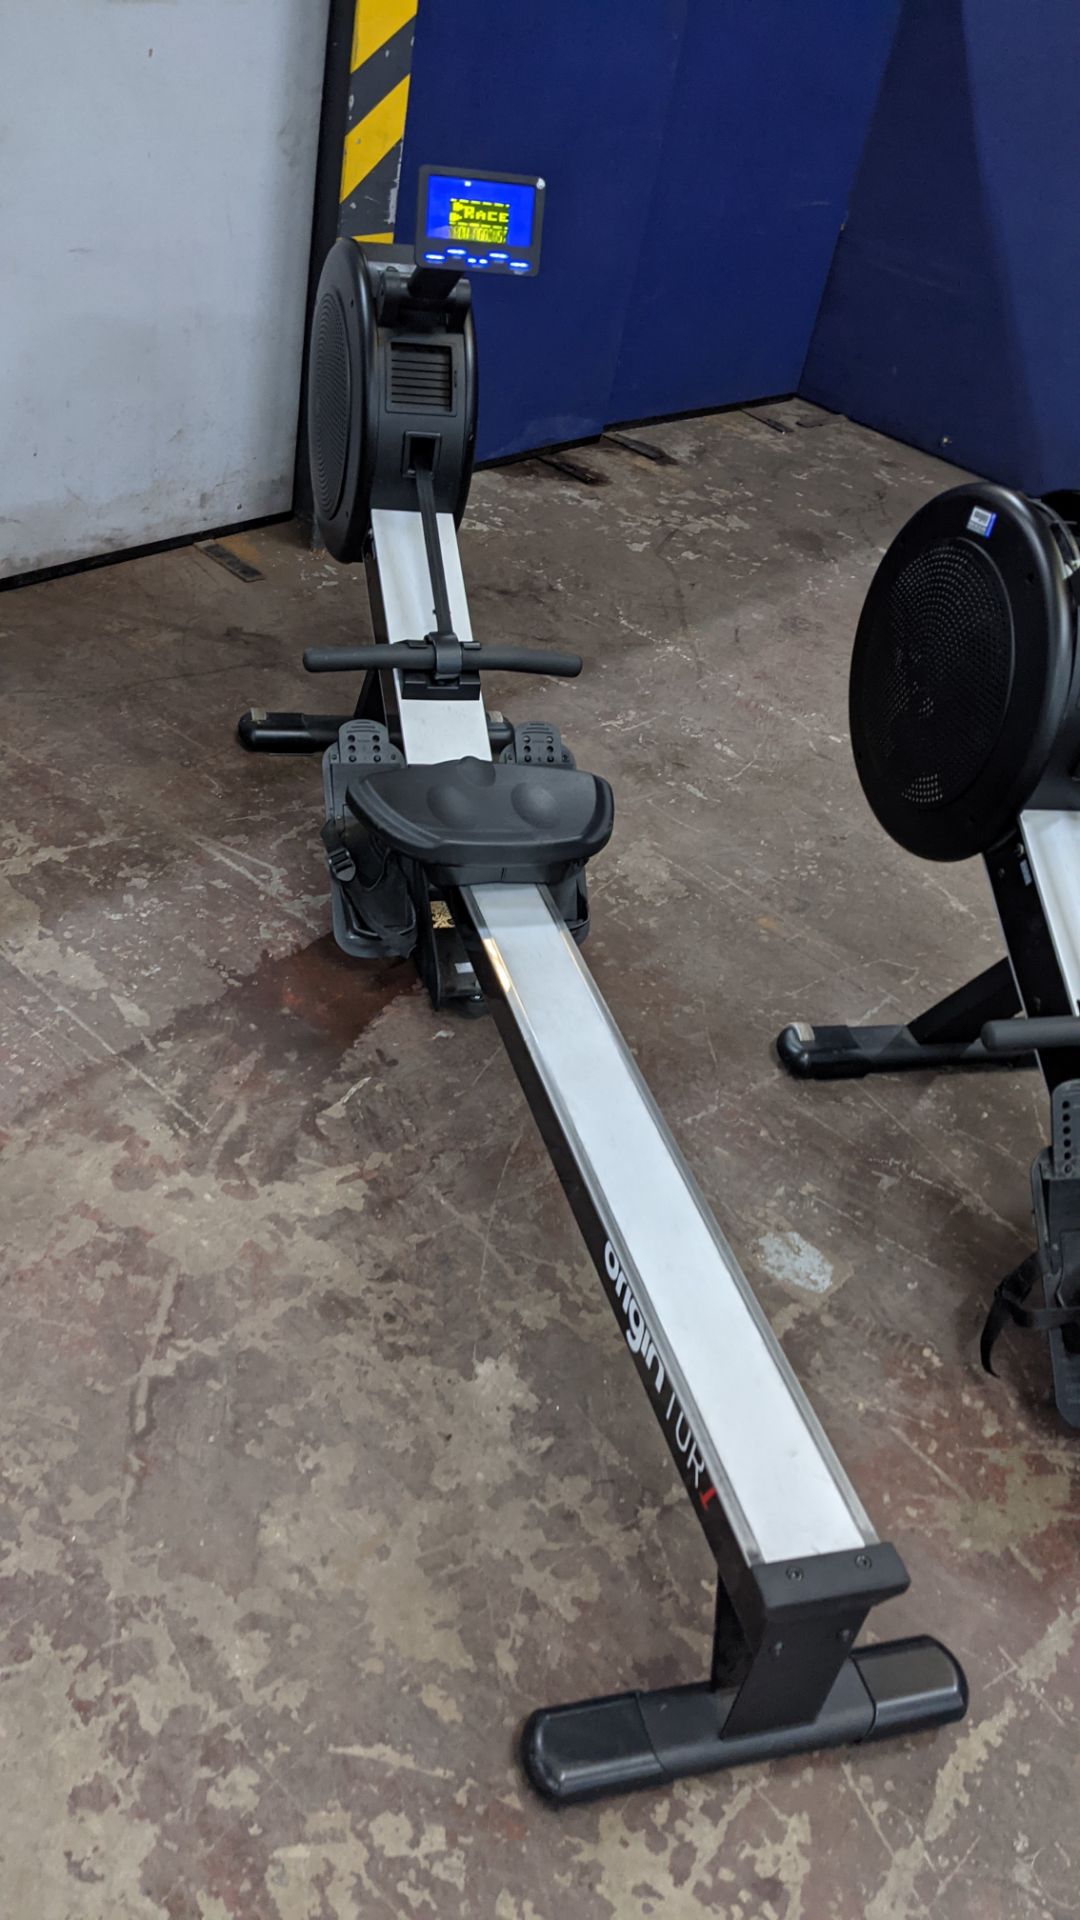 Origin model OR1 Rowing Machine. This machine incorporates a bright LCD display with pre-set workout